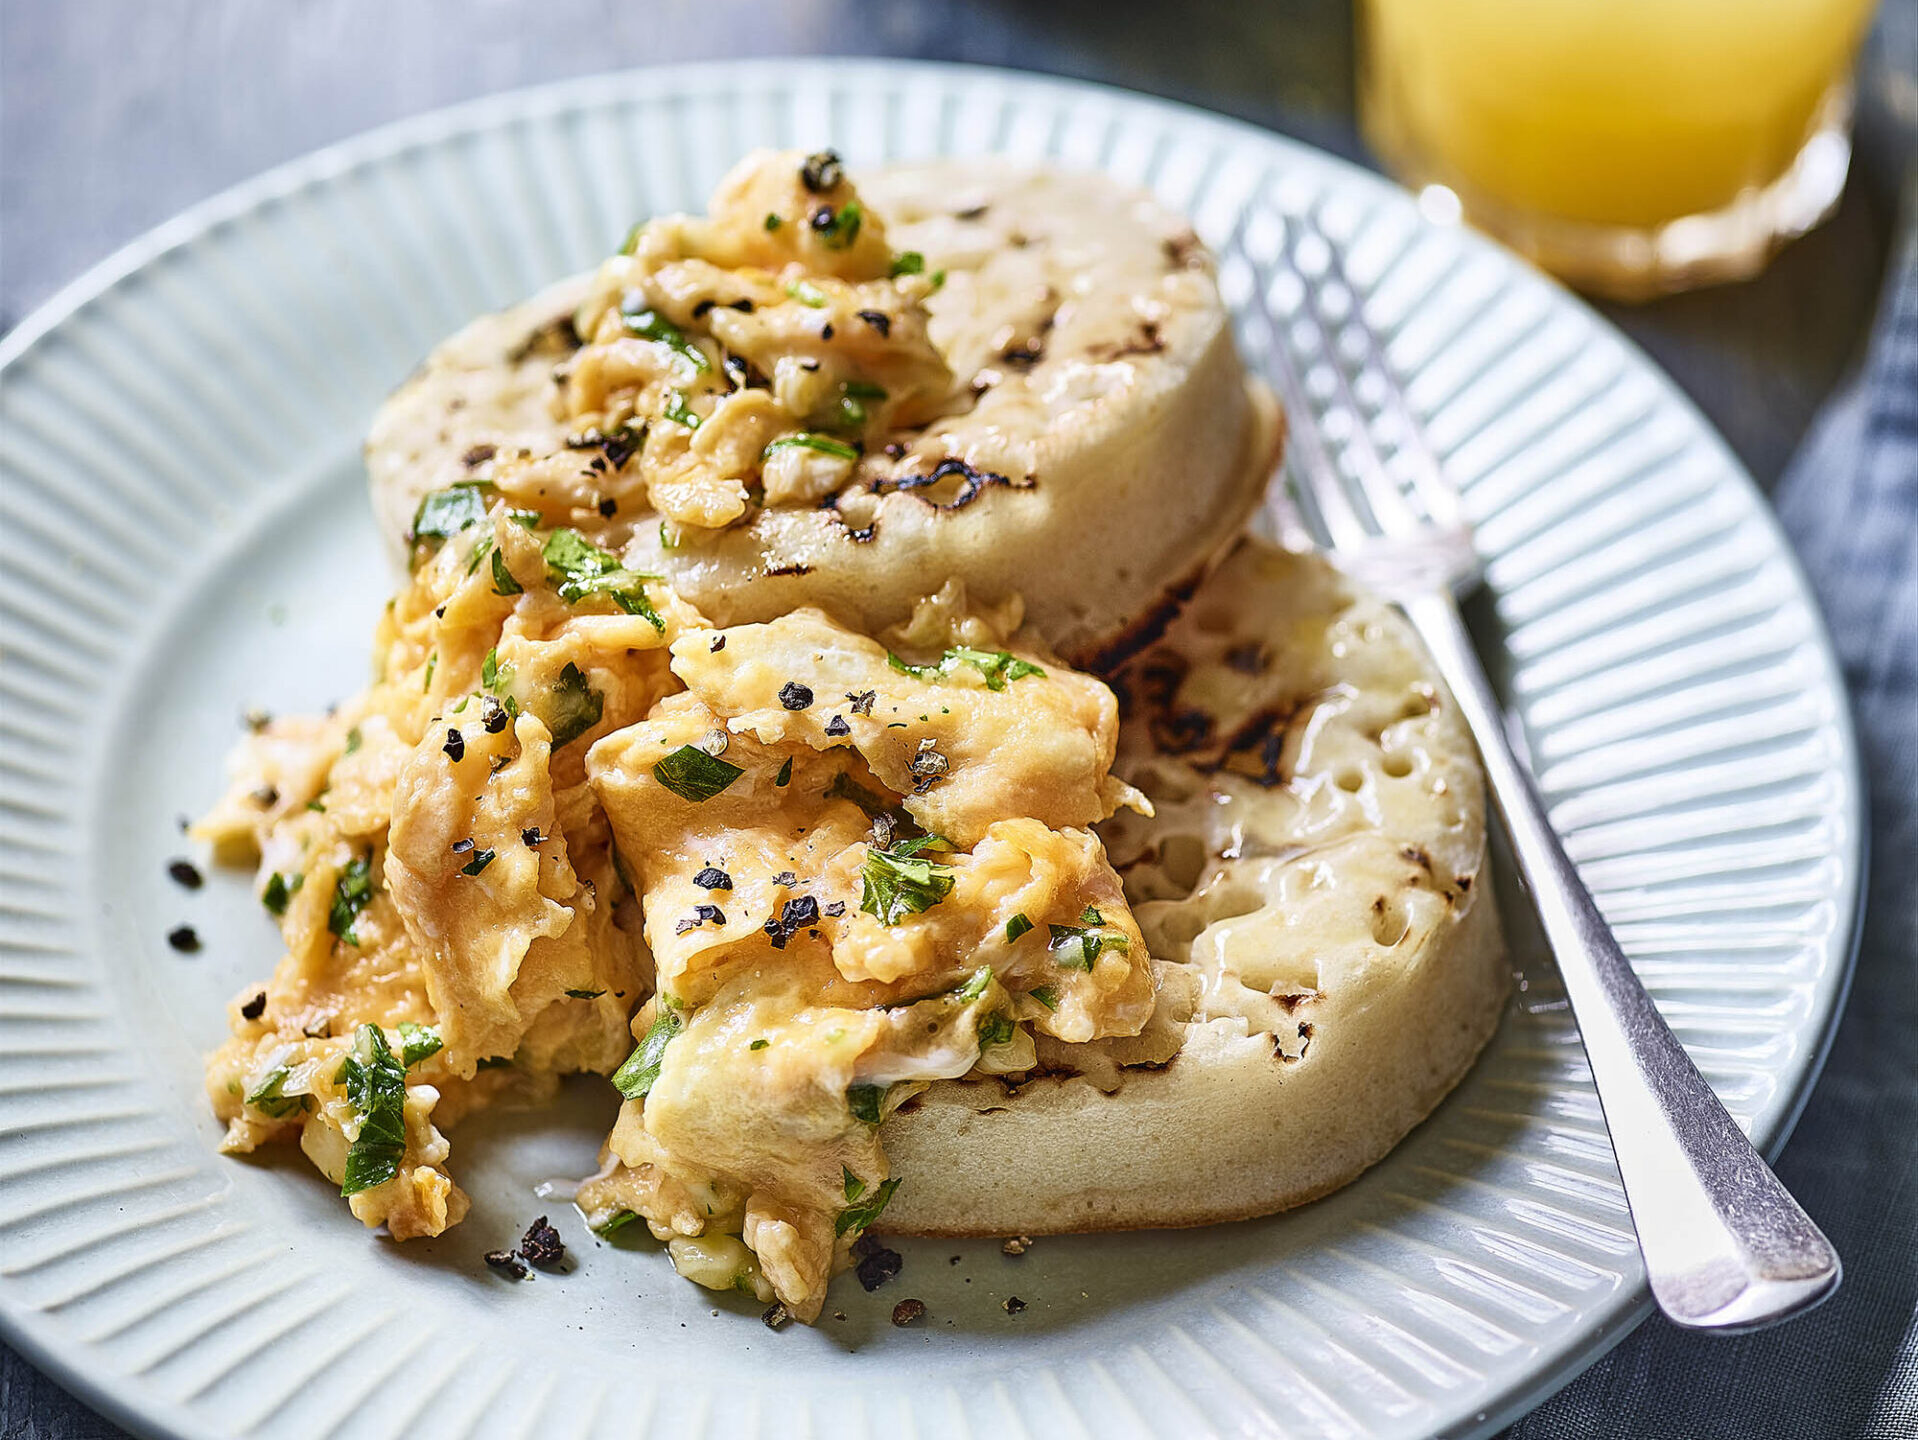 Crumpets with Cheesy Scrambled Egg